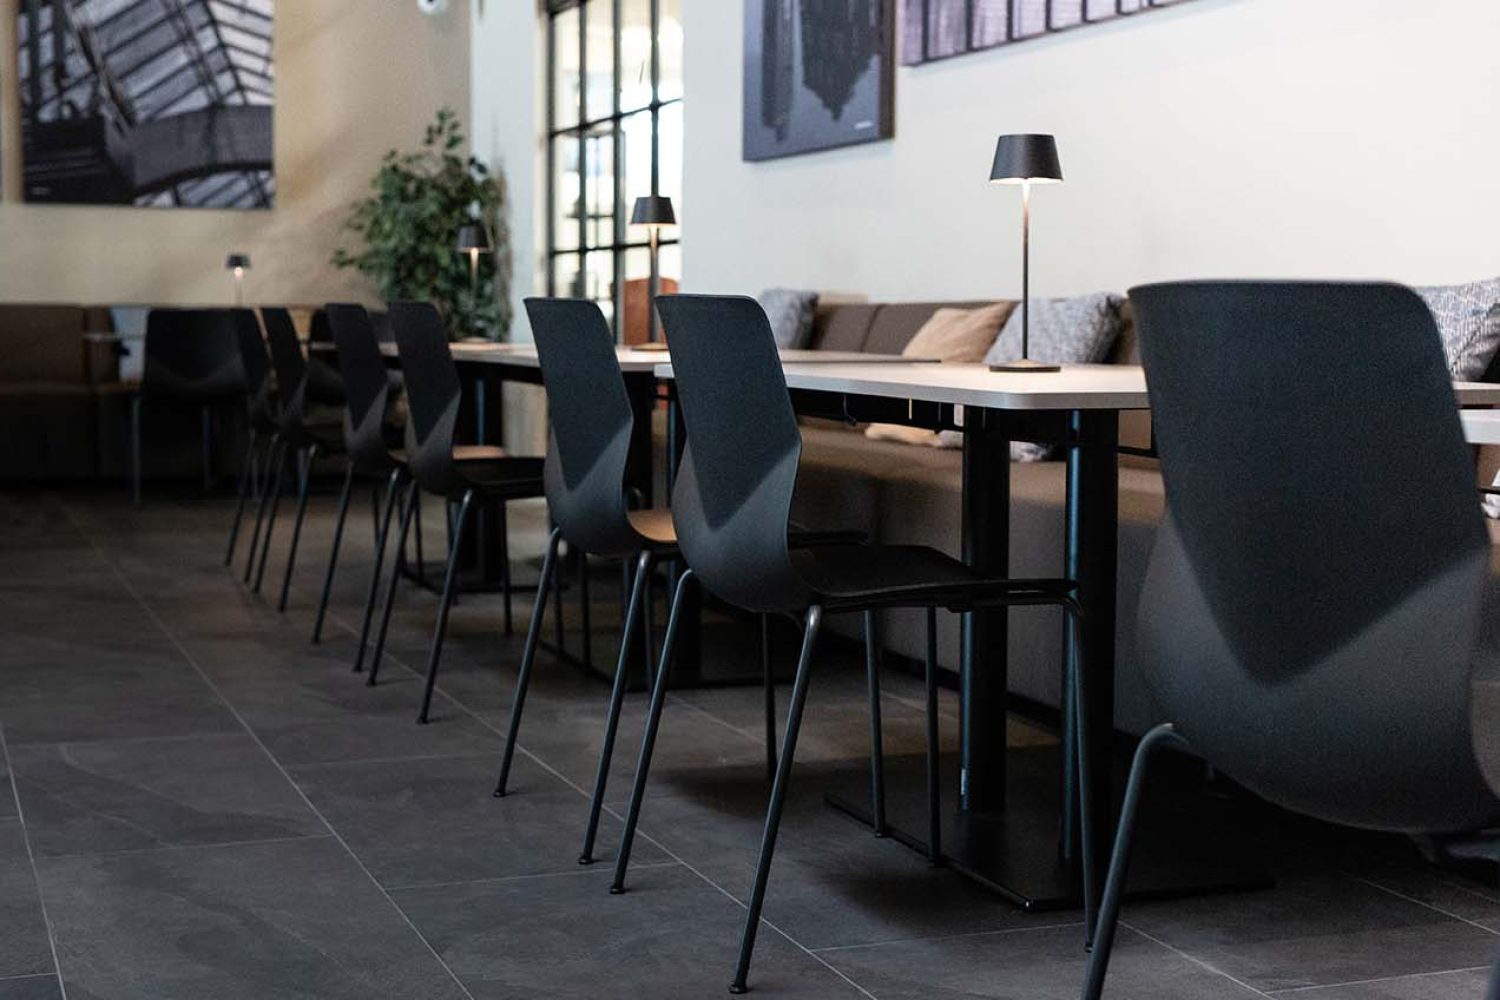 Canteen furniture including a long table and black chairs.